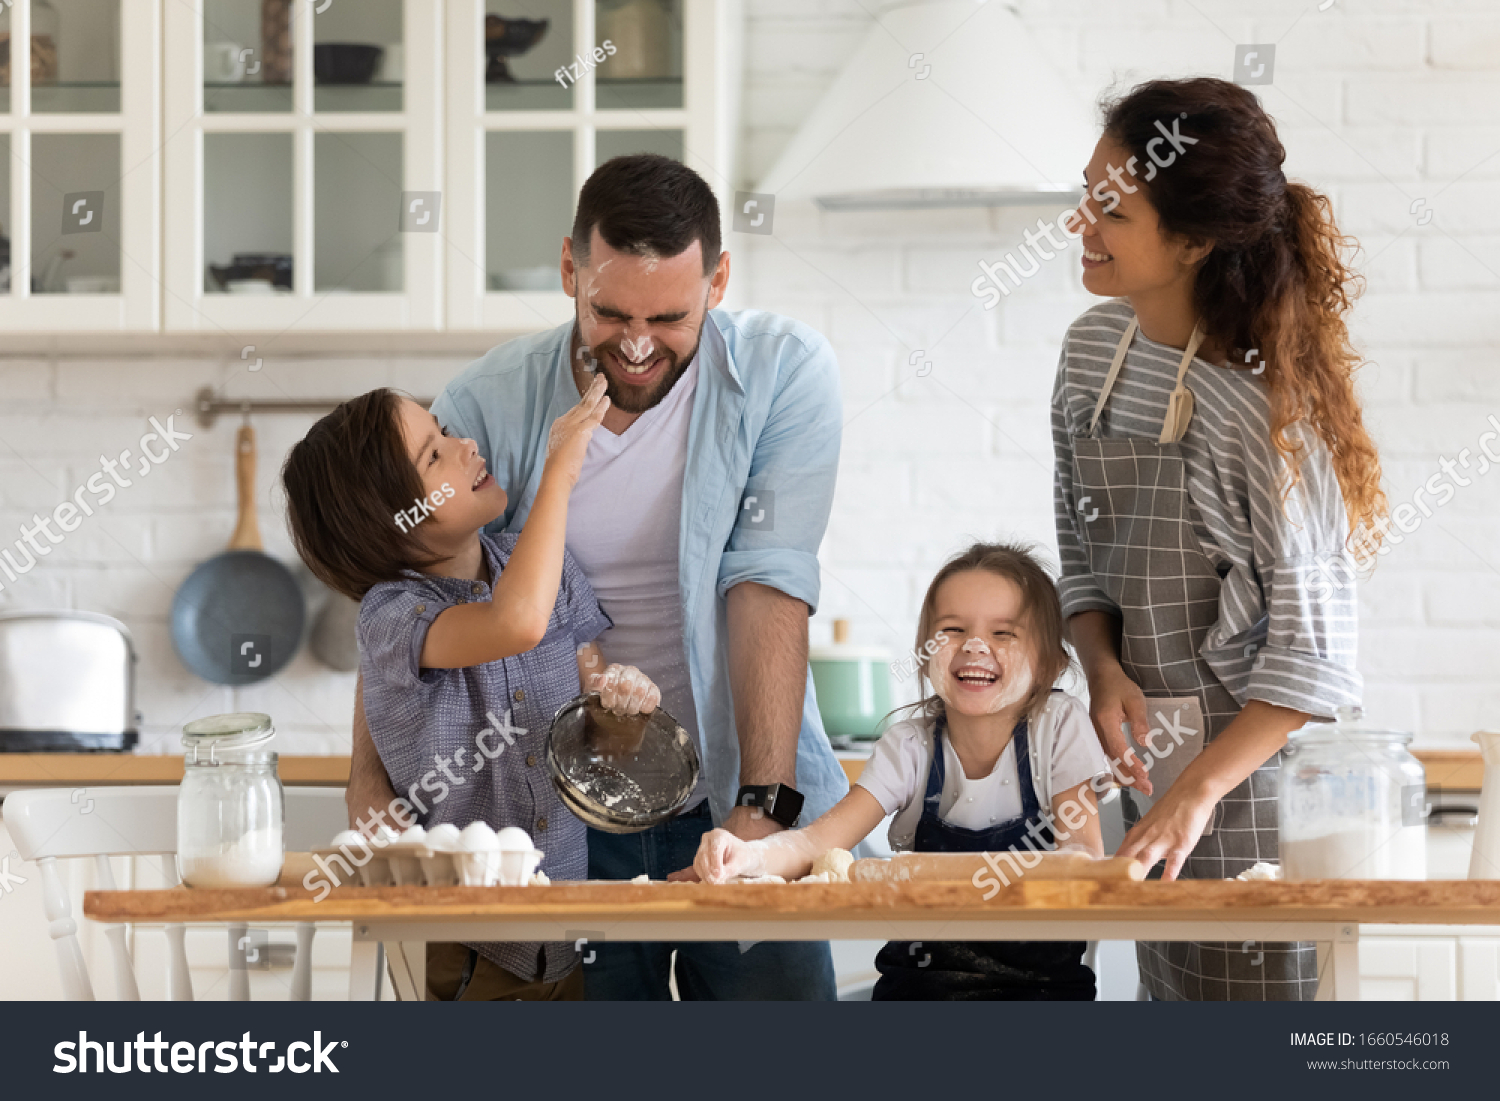 Overjoyed young family with little preschooler kids have fun cooking baking pastry or pie at home together, happy smiling parents enjoy weekend play with small children doing bakery cooking in kitchen #1660546018